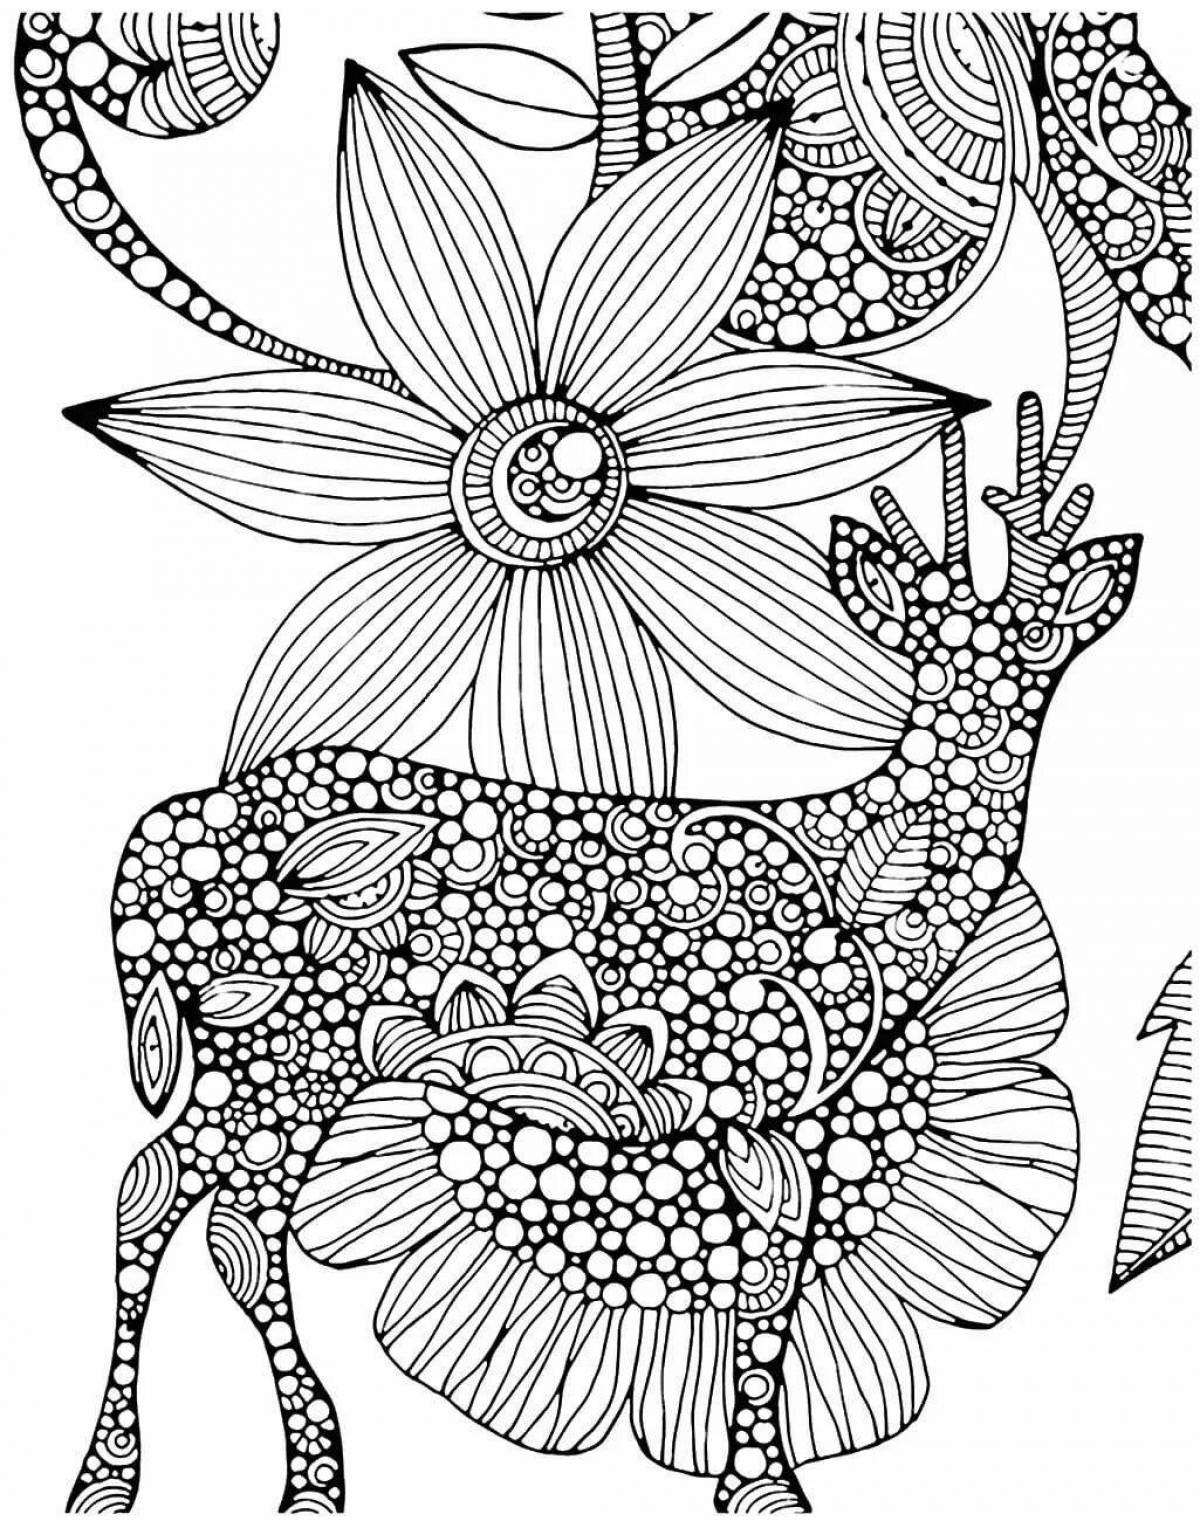 Inspirational coloring art therapy for adults